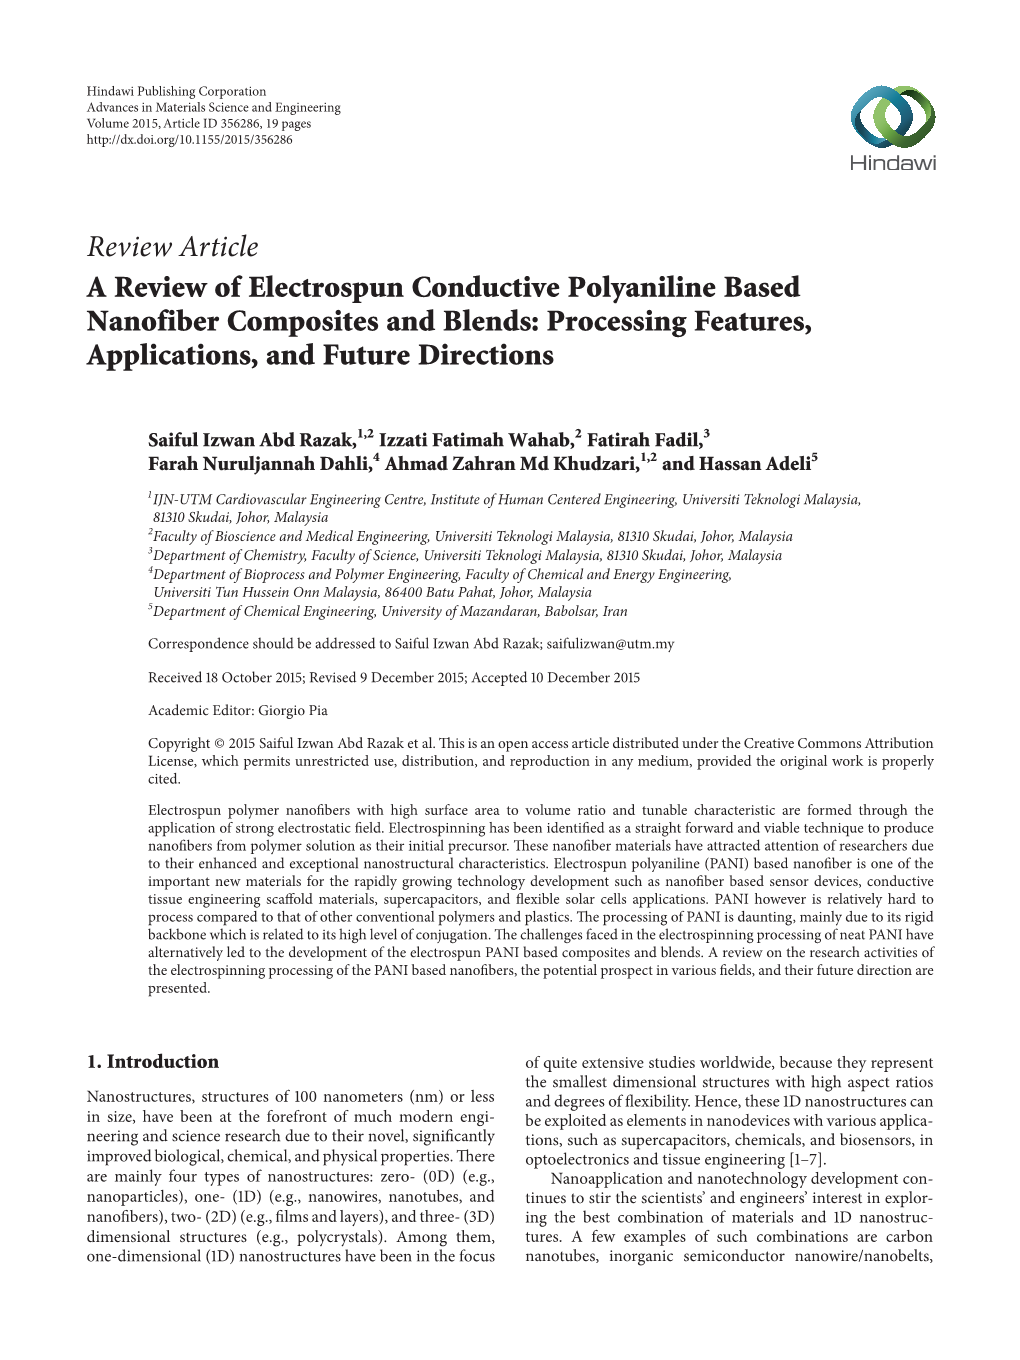 Review Article a Review of Electrospun Conductive Polyaniline Based Nanofiber Composites and Blends: Processing Features, Applications, and Future Directions